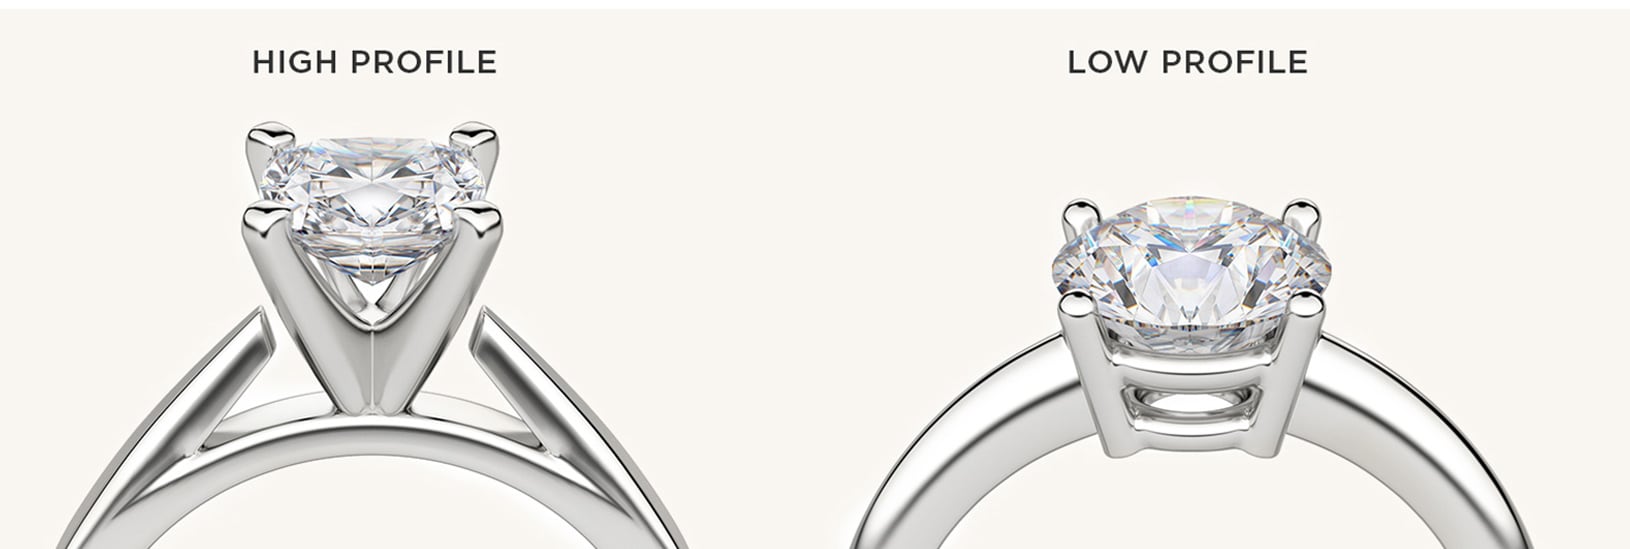 A high profile vs low profile engagement ring